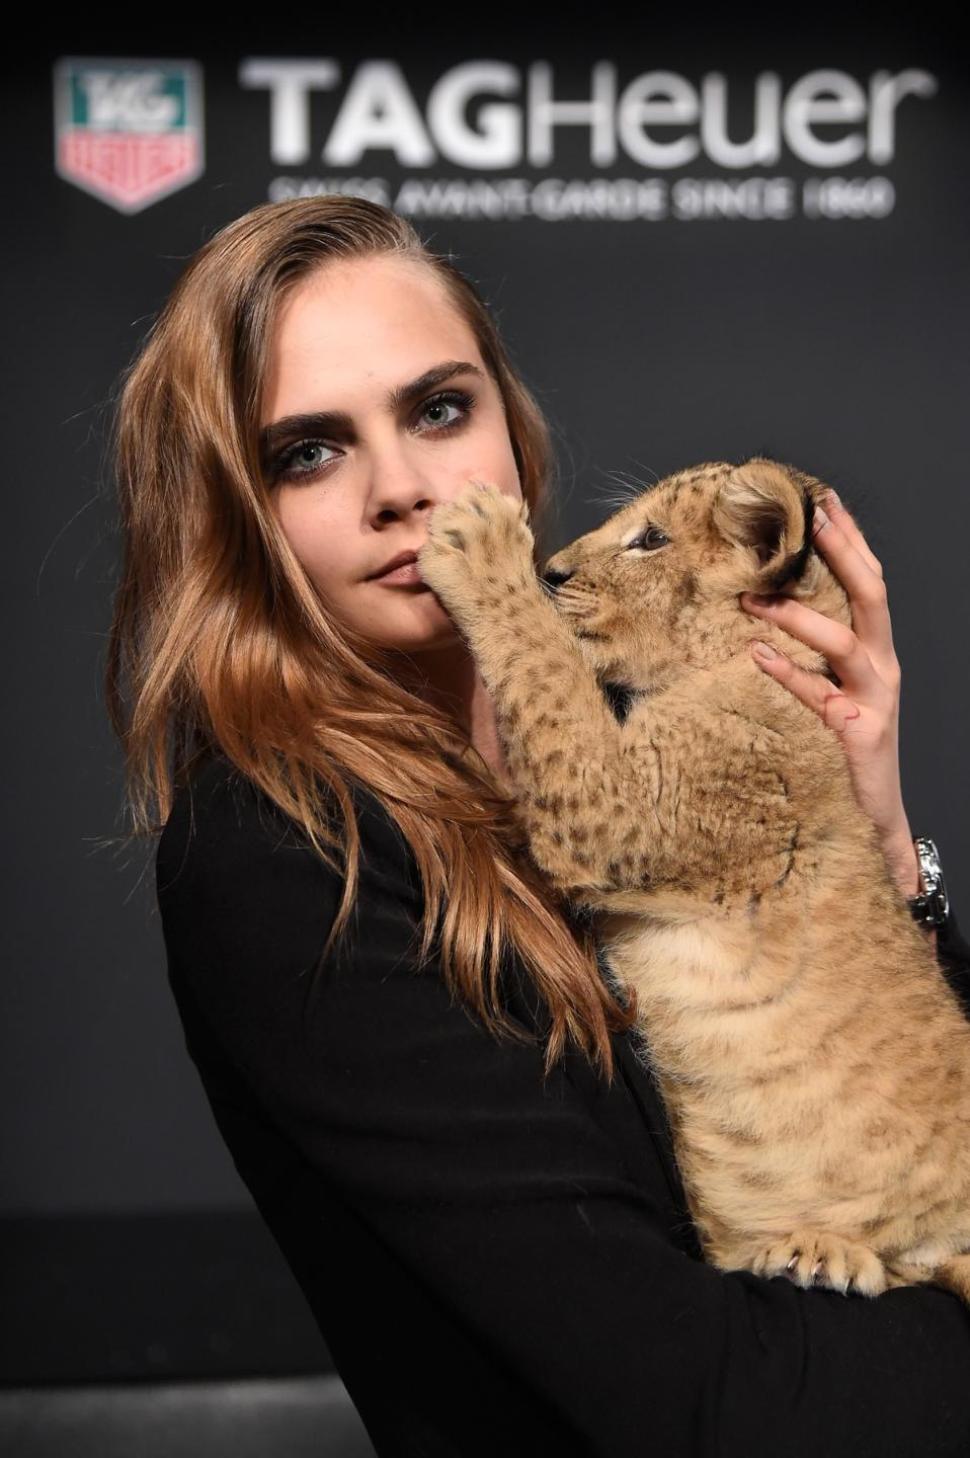 Model Cara Delevingne poses with a baby lion in the Thursday shoot.